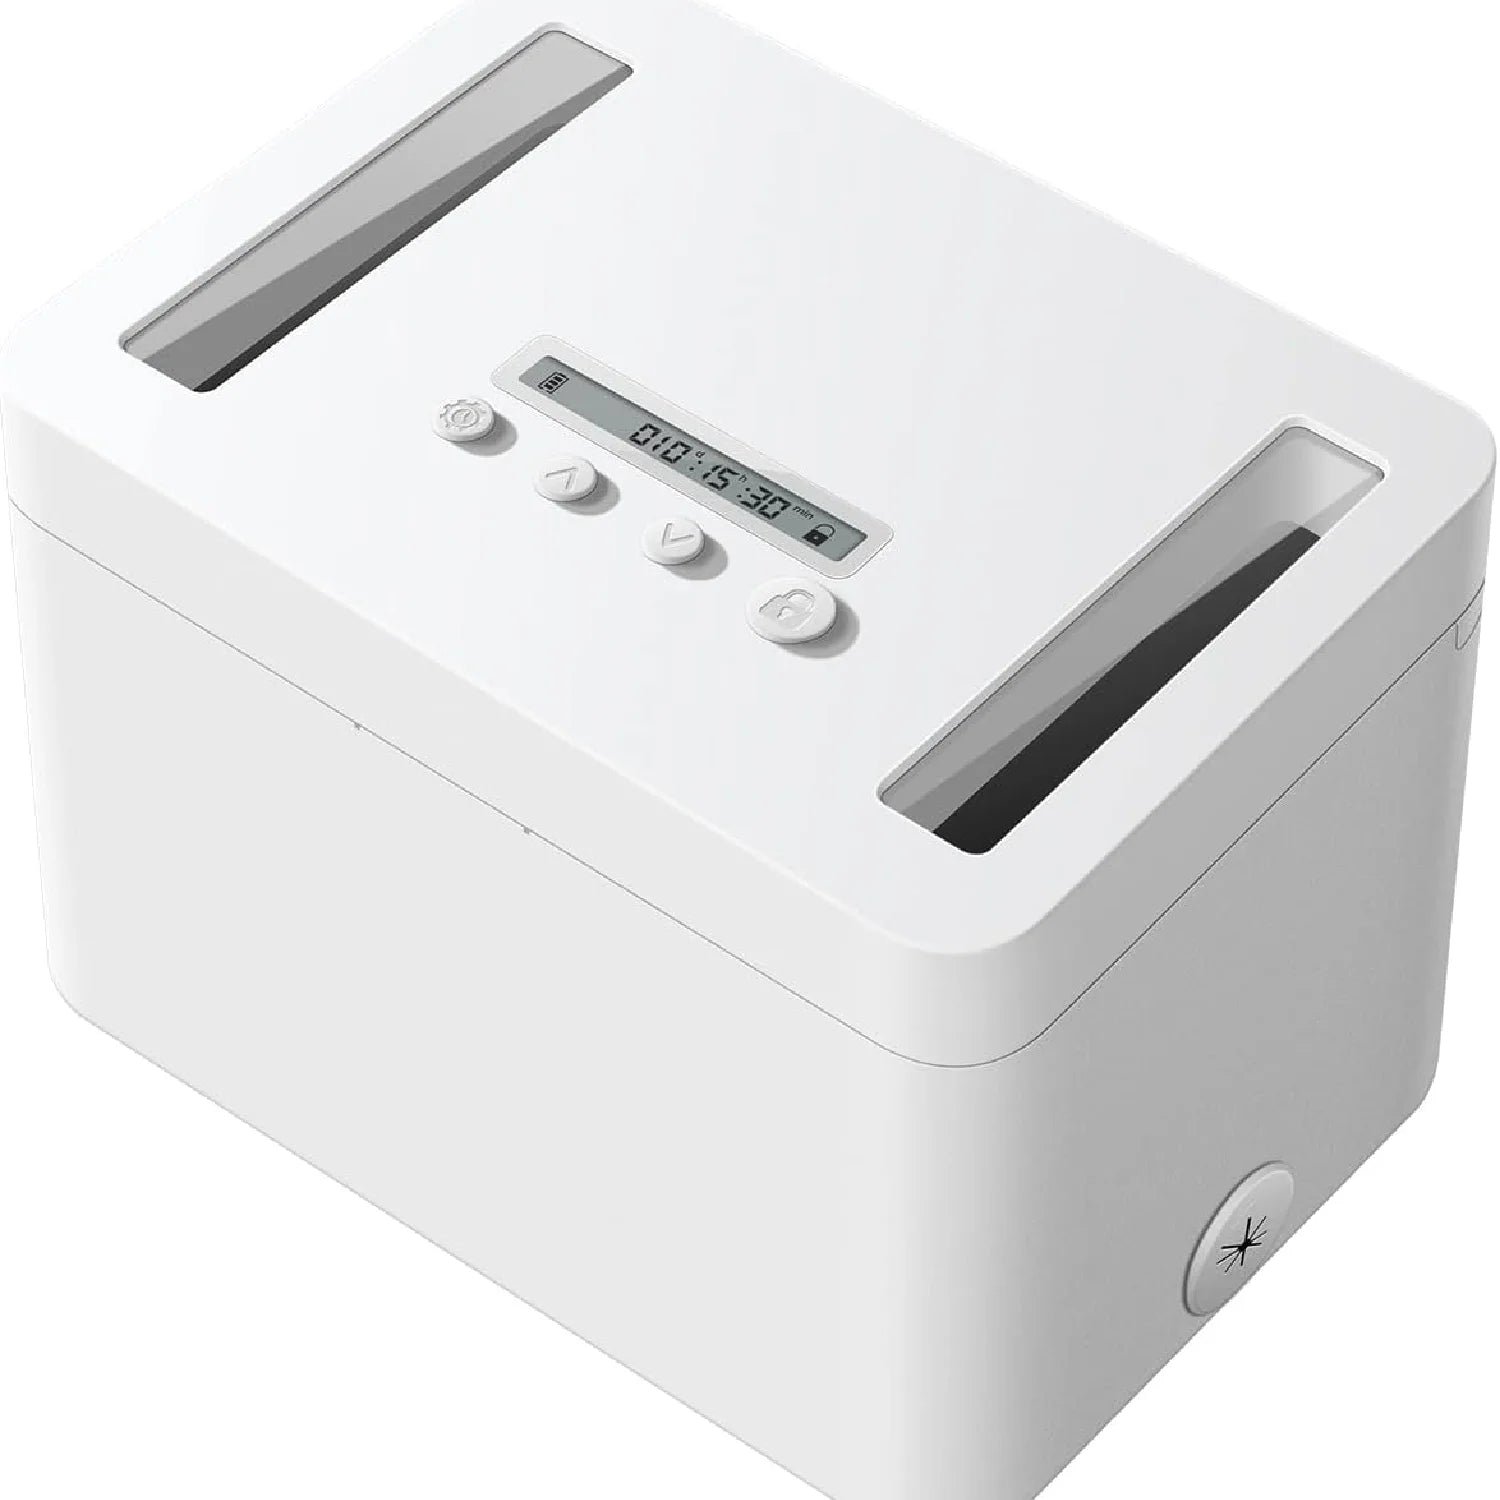 Front View of the Metal Timed Lock Box: A white, sturdy metal lock box with a top slot for inserting devices, featuring a simple keypad and a small LED screen for timer display.lockable box